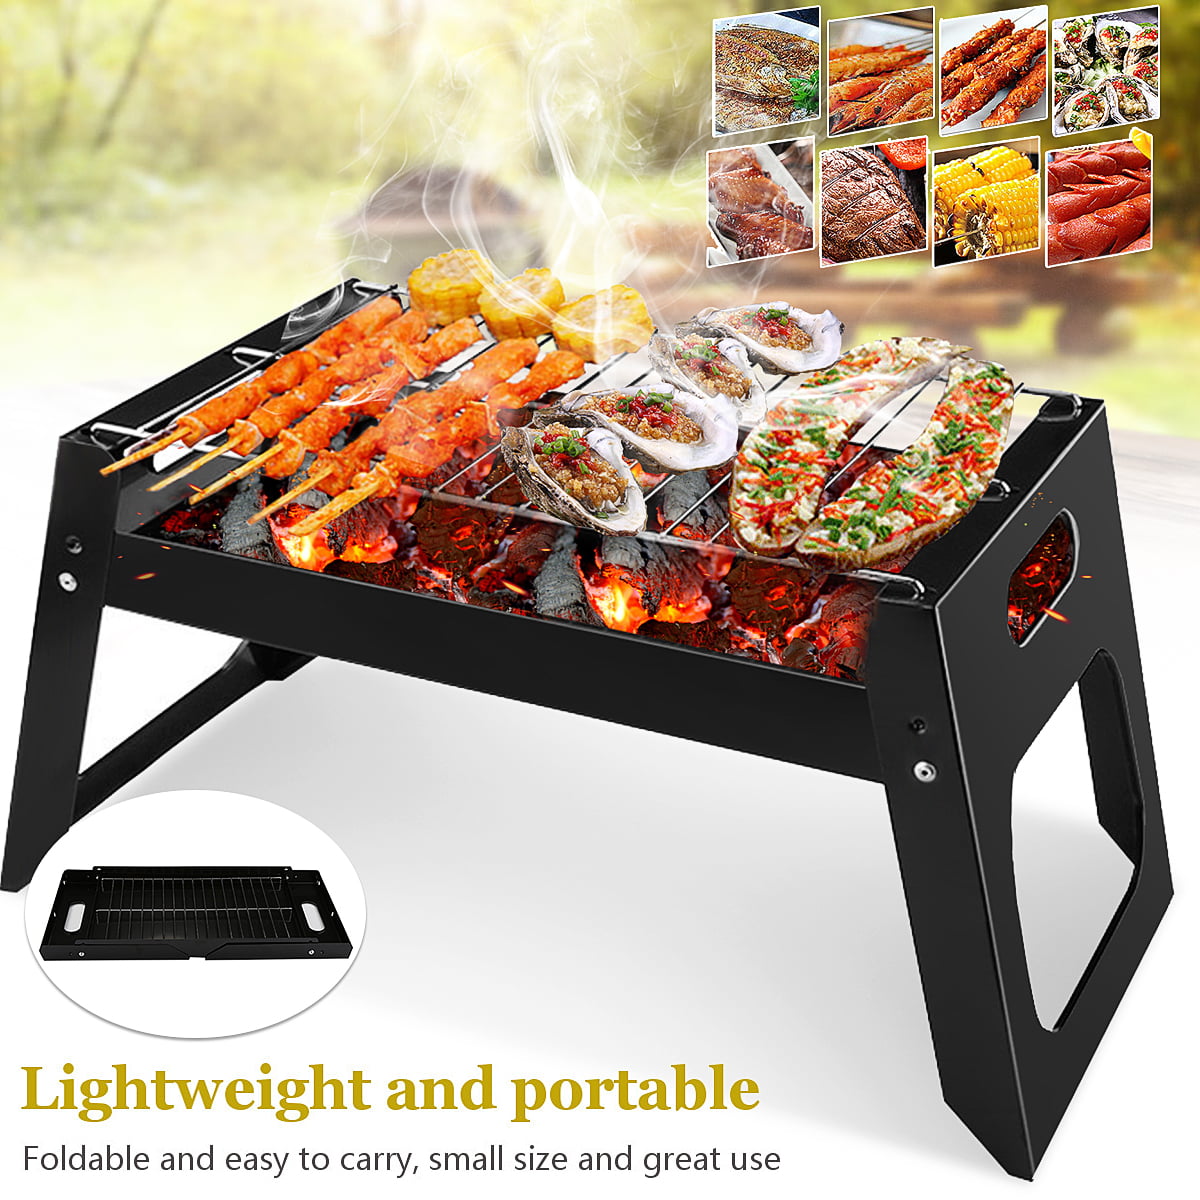 Portable Barbecue Stove Charcoal BBQ Grill Foldable Camping Patio Picnic Burner 